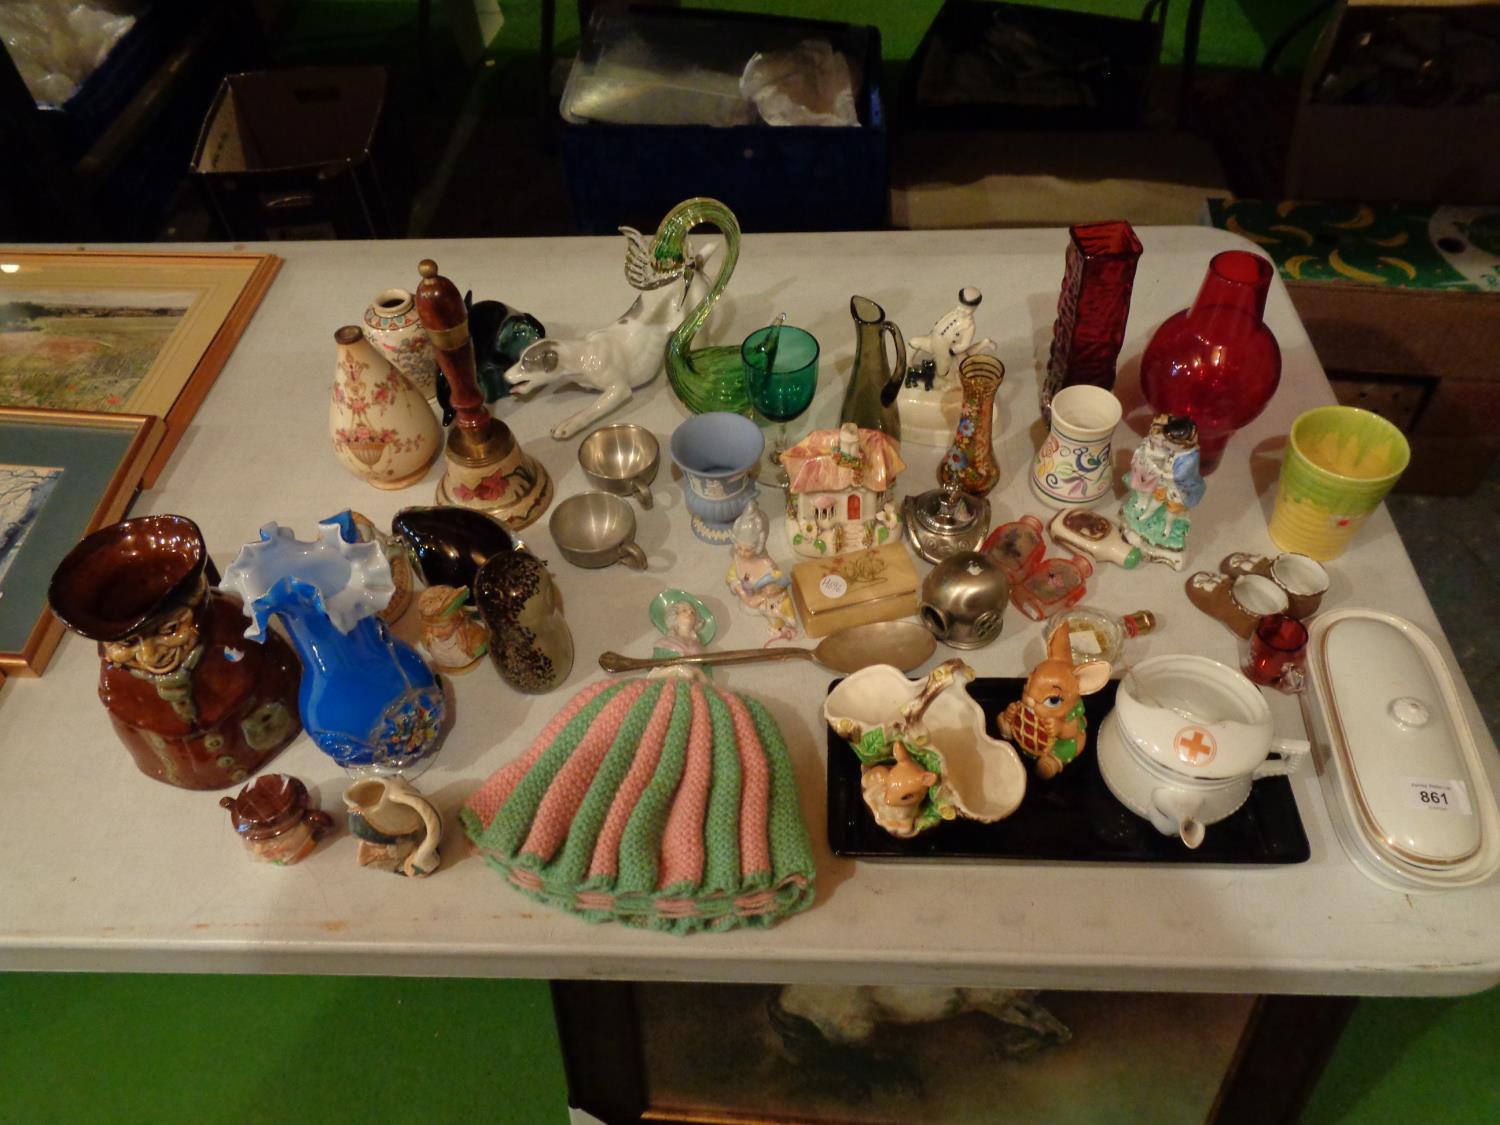 A MIXED SELECTION OF ITEMS TO INCLUDE SMALL VASES, A TRINKET TRAY AND SOME CERAMIC ITEMS